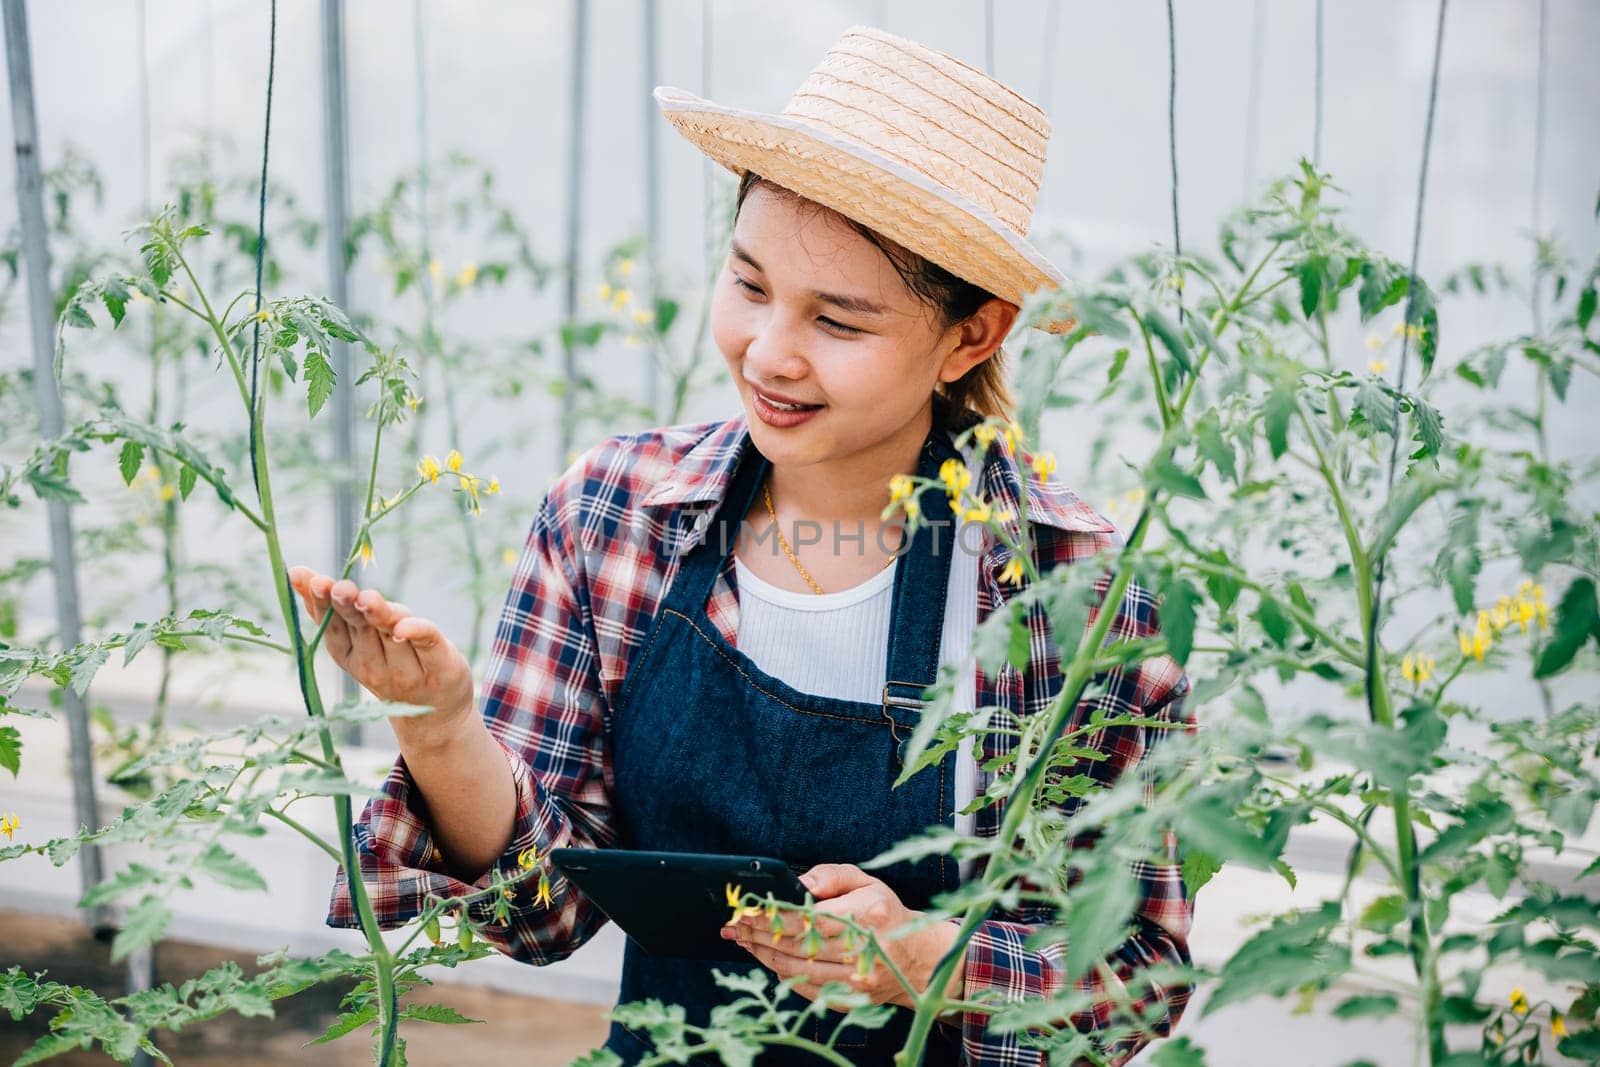 Agronomist examines tomato farm with tablet for improved productivity. Woman biologist analyzes growth data of healthy green plants. Hydroponic irrigation for botanical science insights.